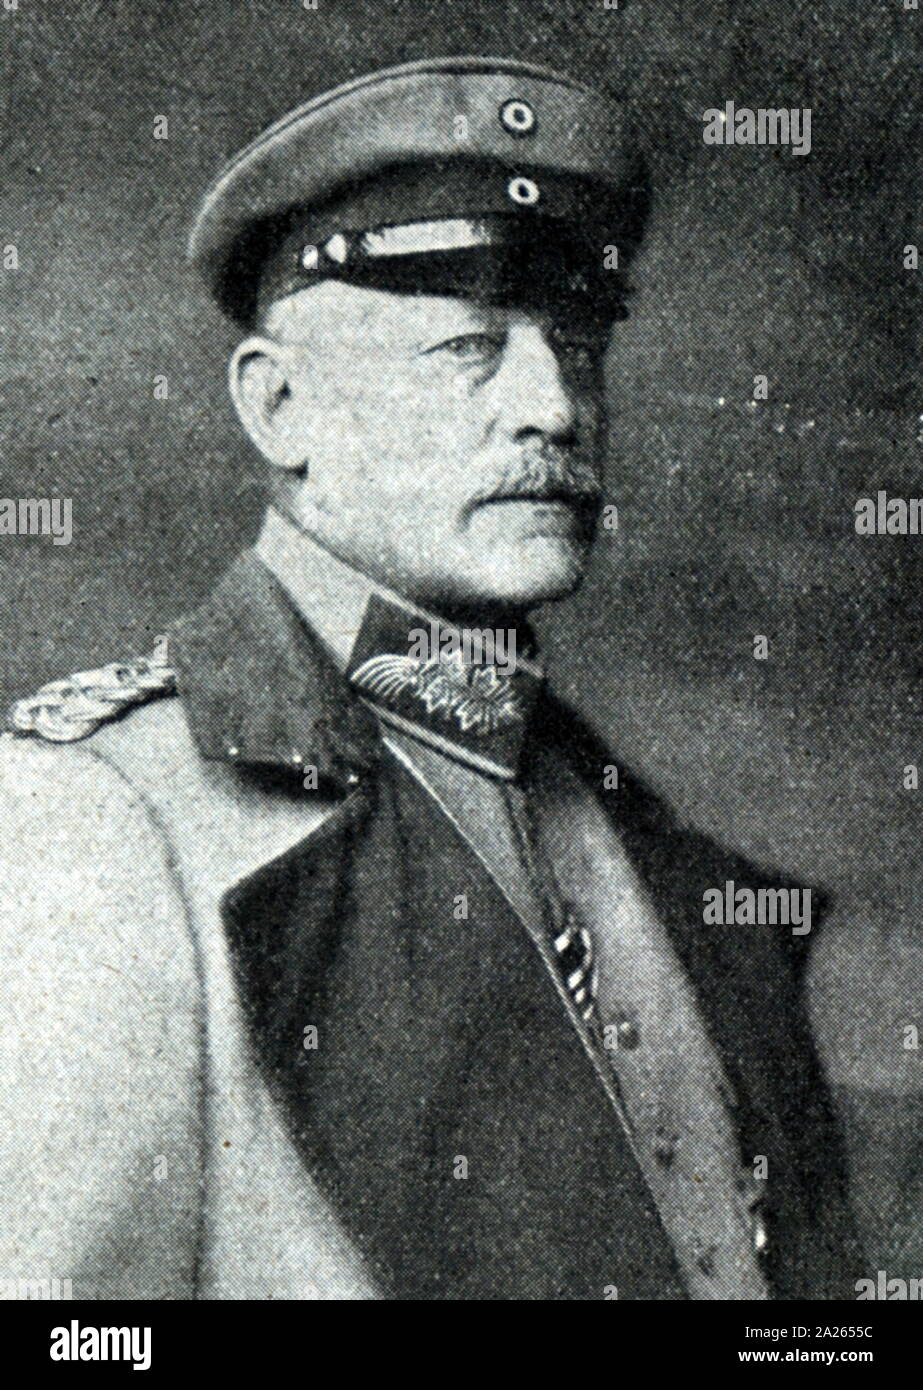 Oskar Emil von Hutier (1857 – 1934), German general during the First World War. He served in the German Army from 1875 to 1919, including war service. During the war, he commanded the army that took Riga in 1917 and was transferred to the Western Front in 1918 to participate in the Michael offensive that year. He is frequently but mistakenly credited with inventing the stormtrooper tactics his forces employed to great effect during the Michael offensive. After retiring from the Army in 1919, he presided over the German Officers' League until his death on 5 December 1934. Stock Photo